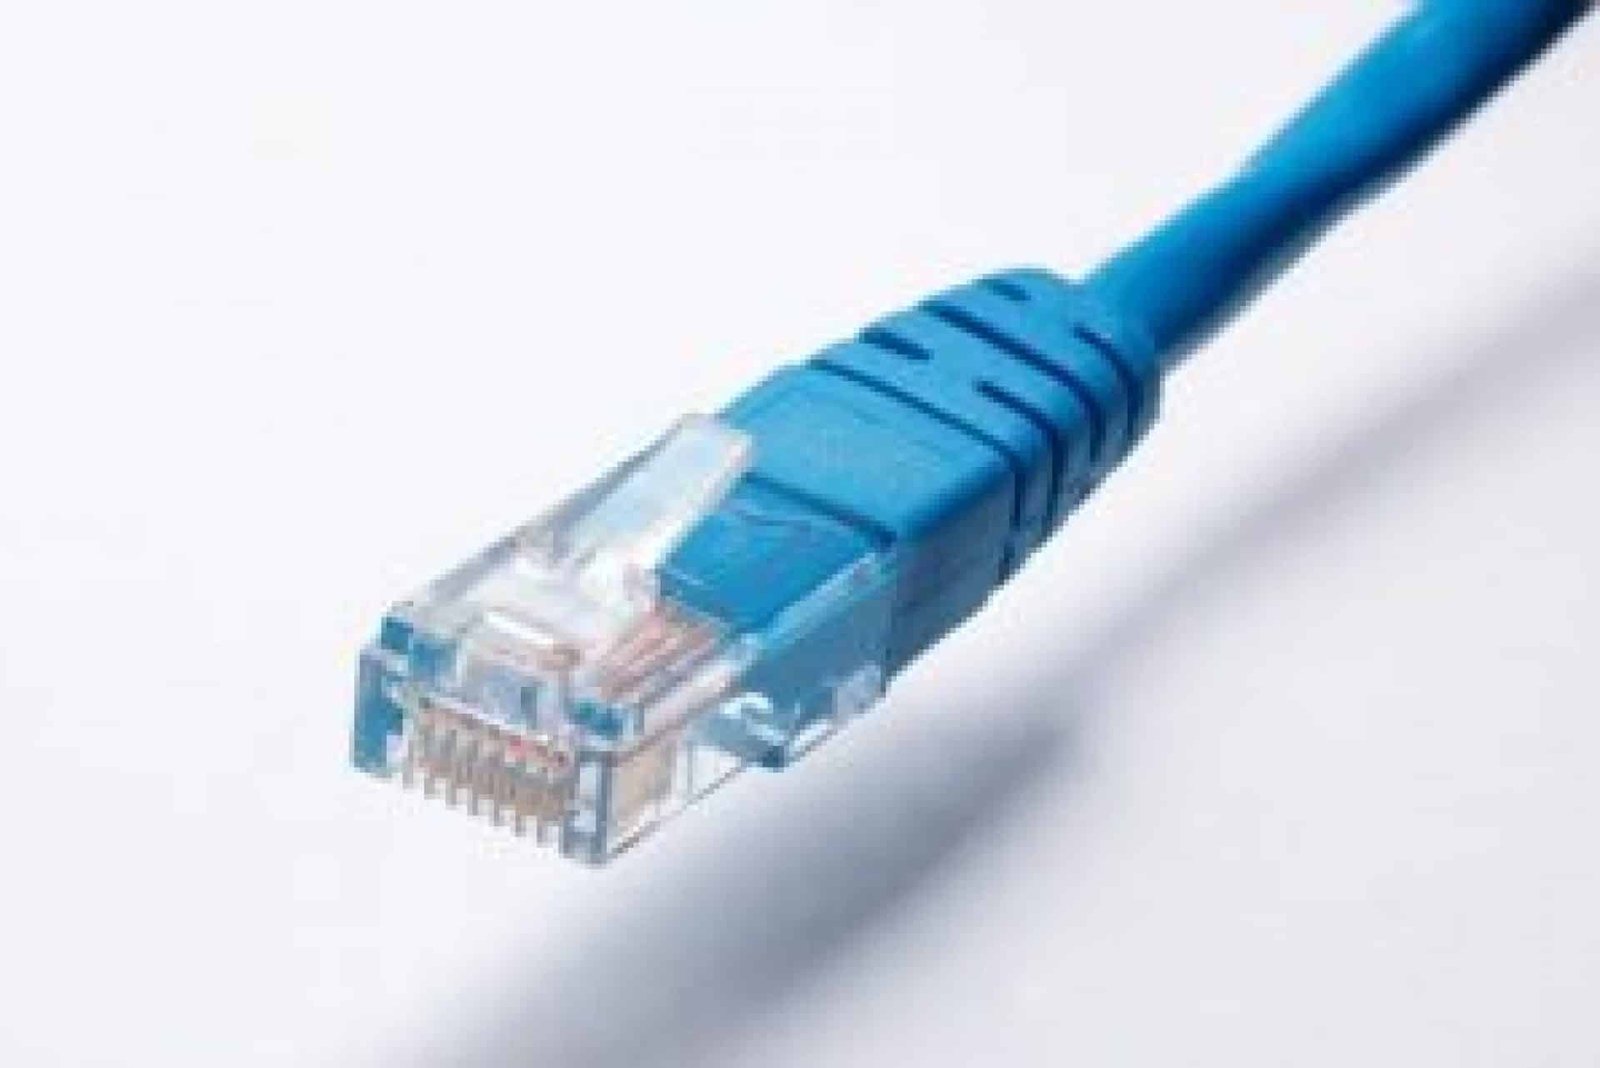 How quick is Gigabit Ethernet by and by